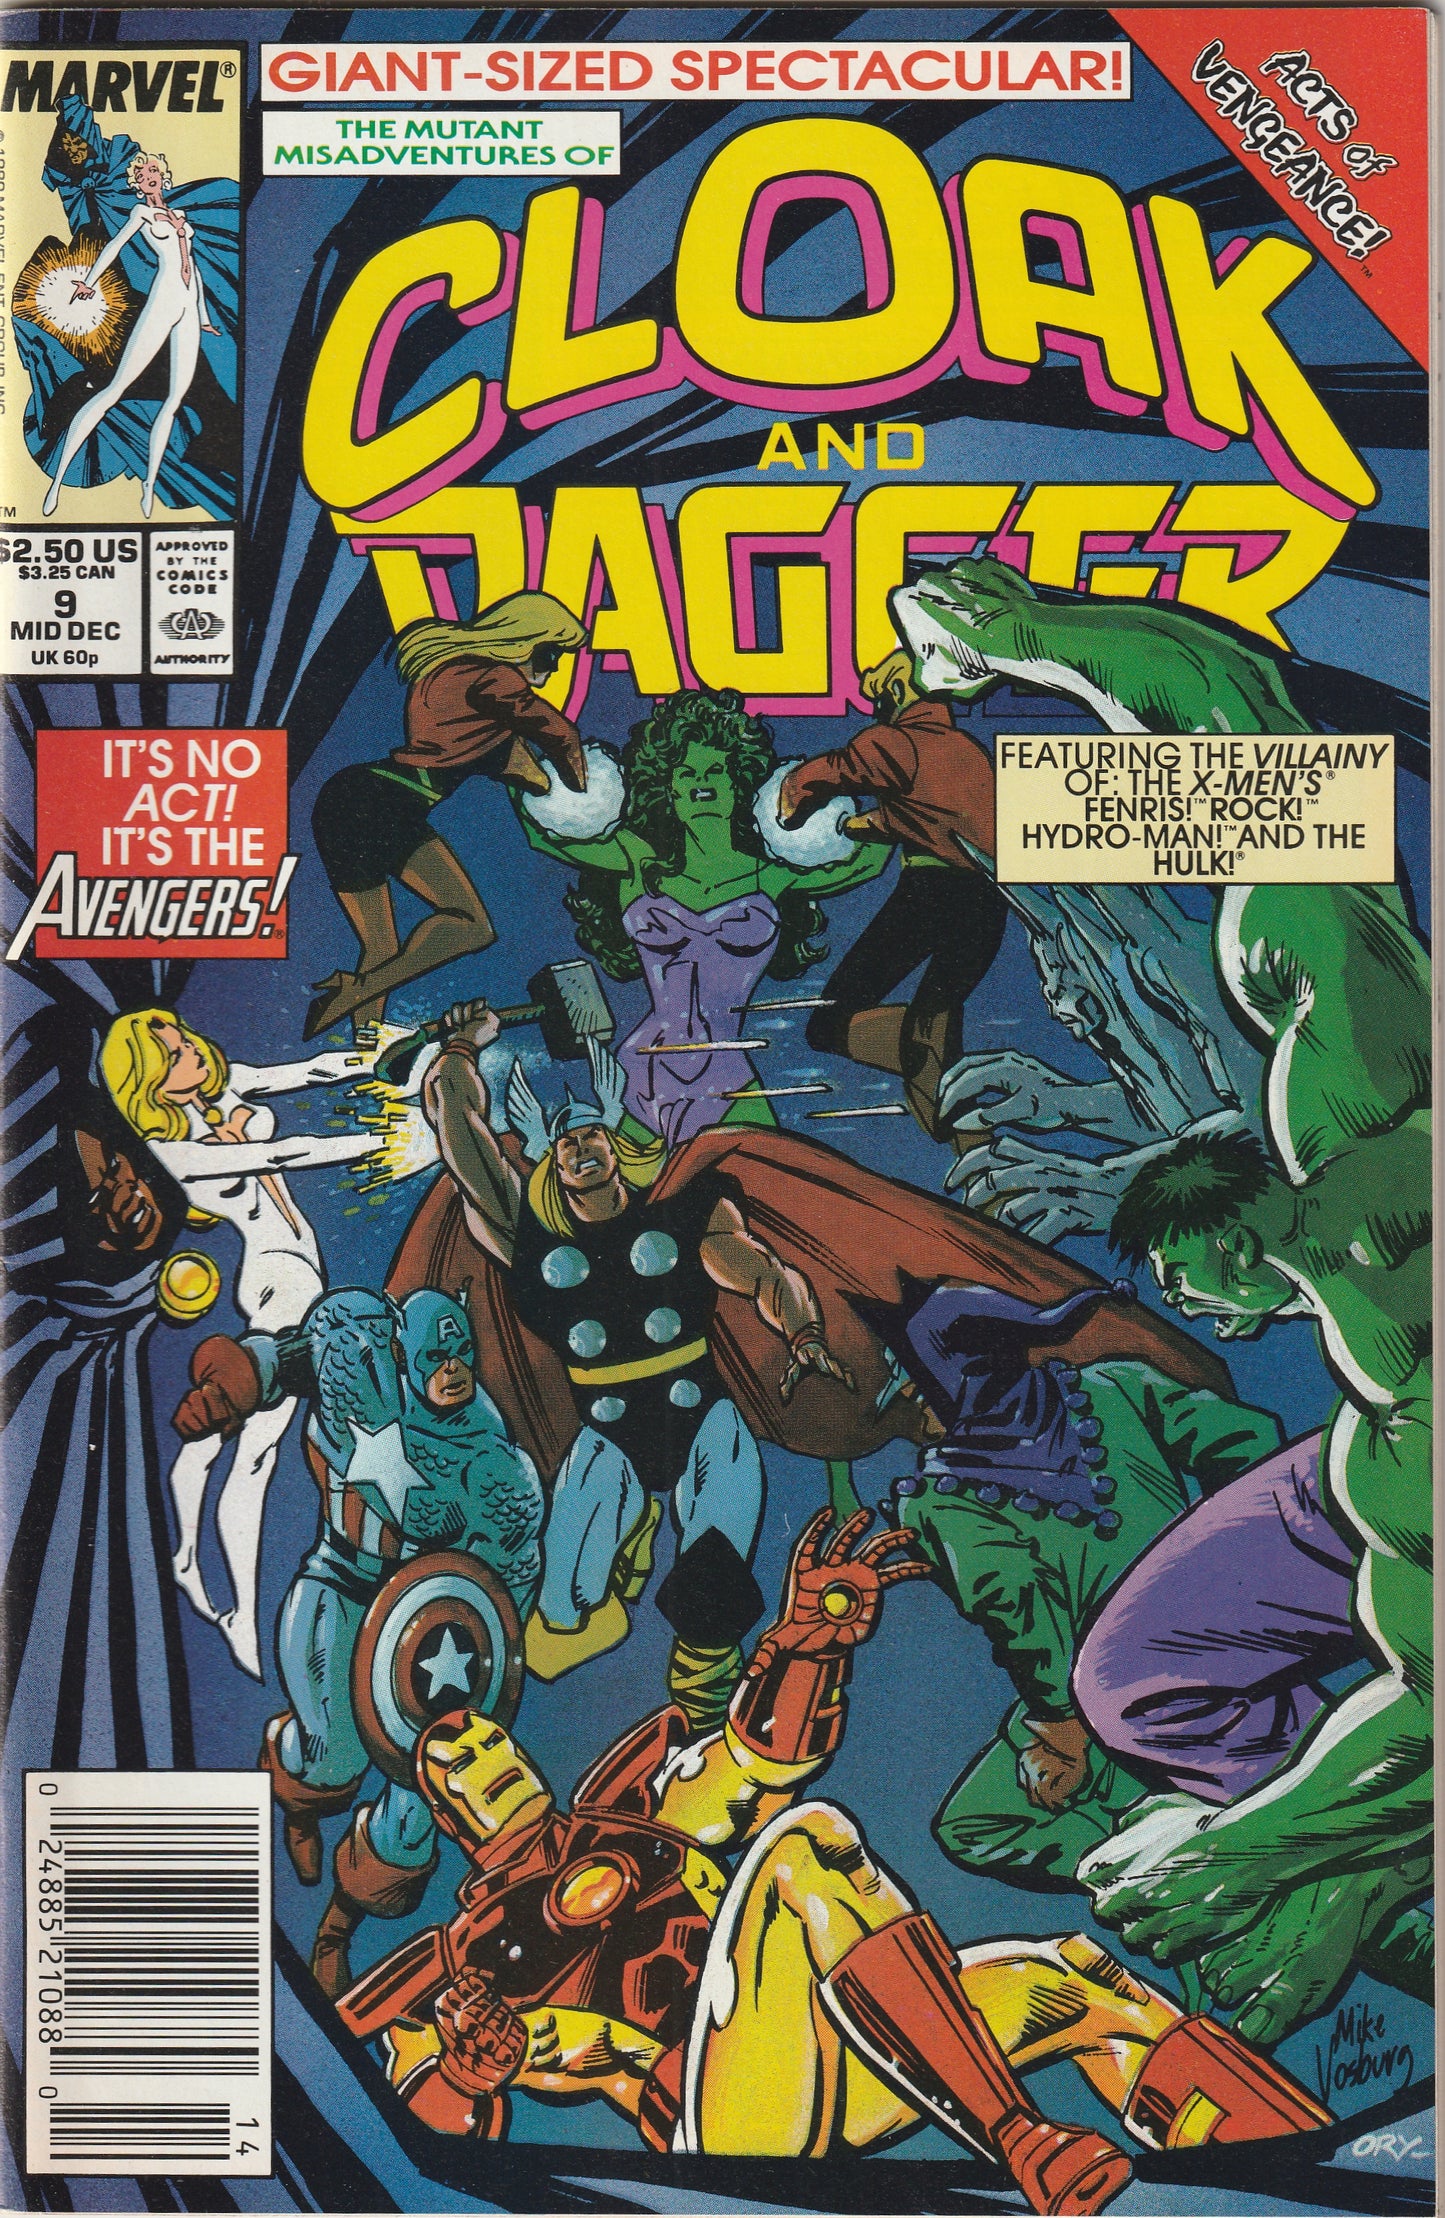 The Mutant Misadventures of Cloak and Dagger #9 (1989) - Giant Size Spectacular